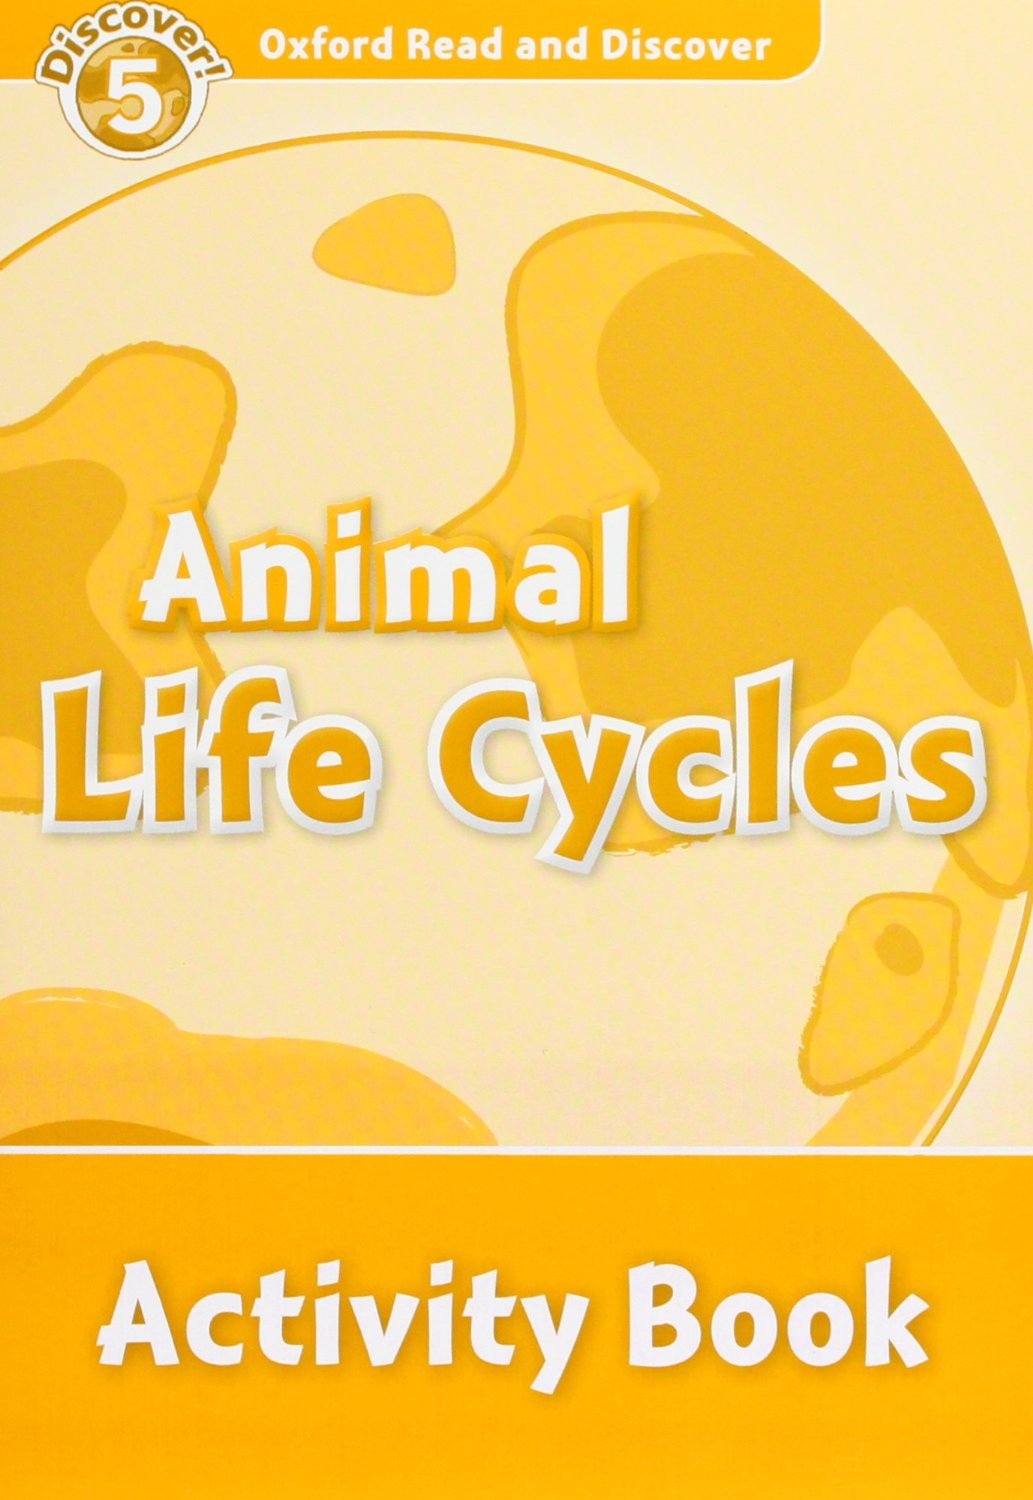 ANIMAL LIFE CYCLES (OXFORD READ AND DISCOVER, LEVEL 5) Activity Book 